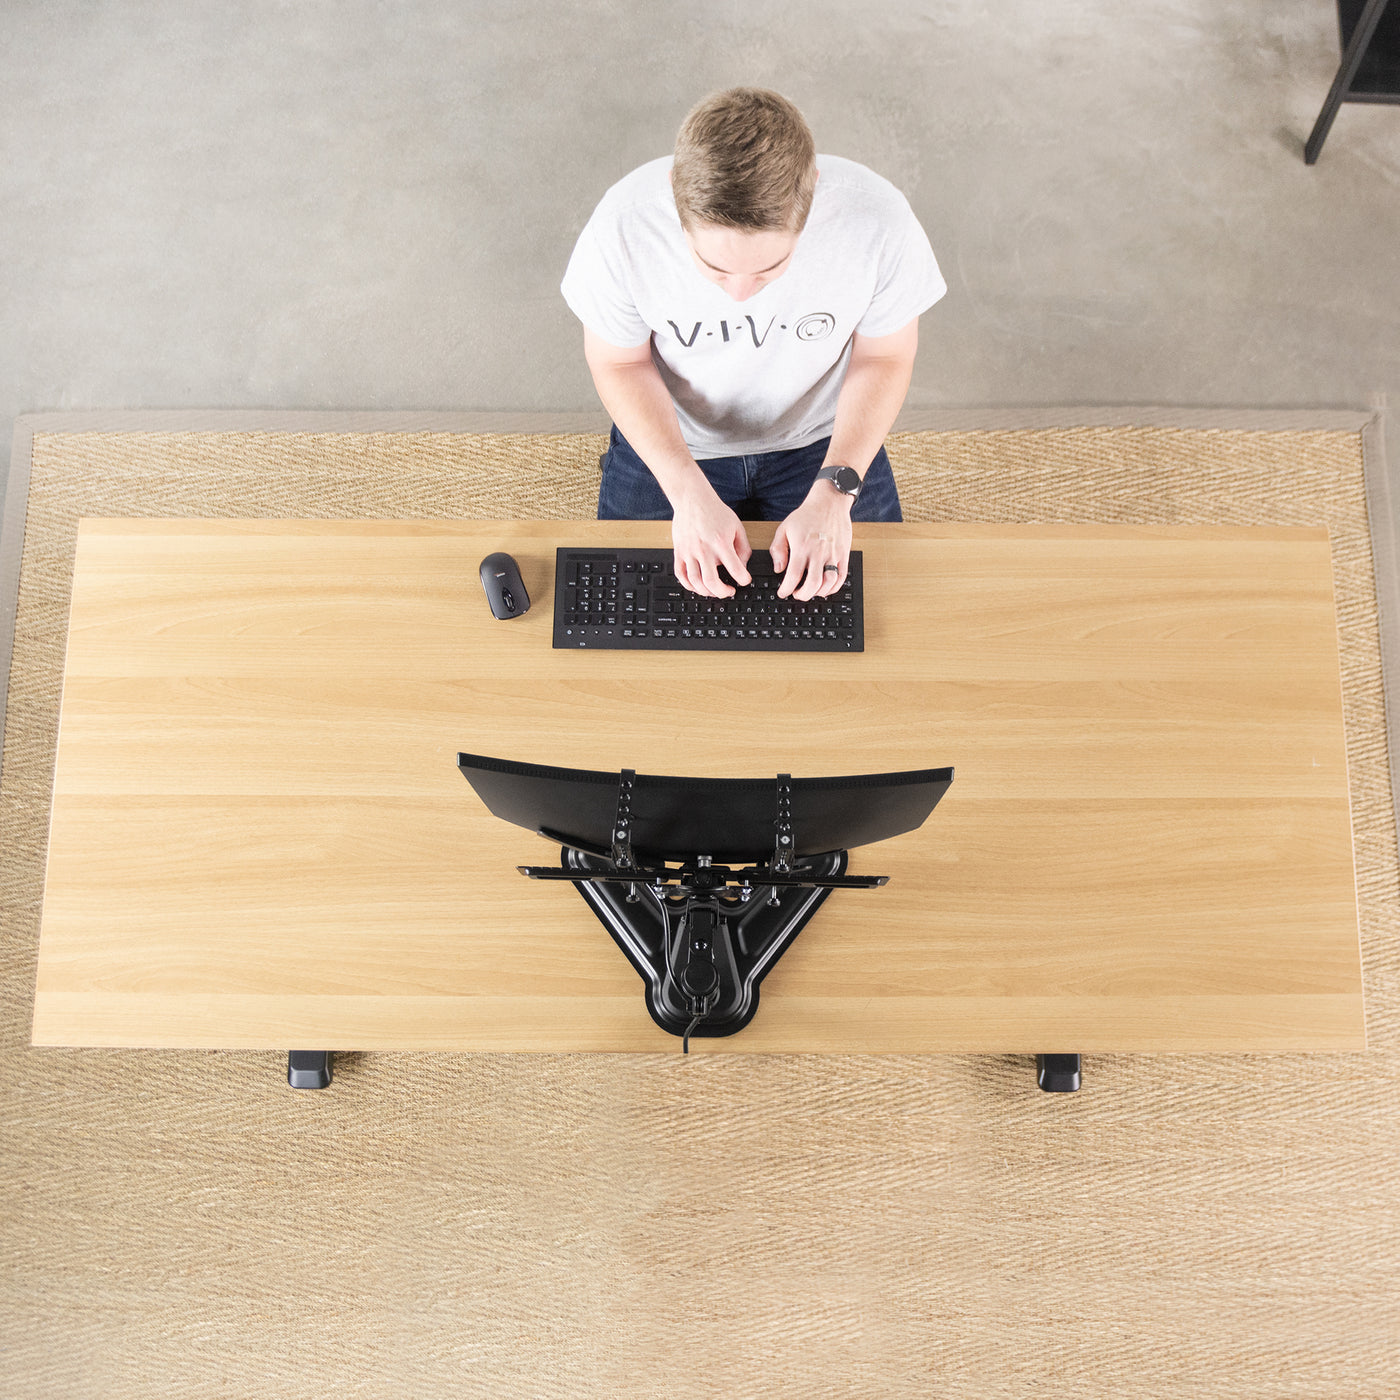 Man working from a sit to stand ergonomic desk from vivo with a universal VESA adapter bracket supporting monitor.